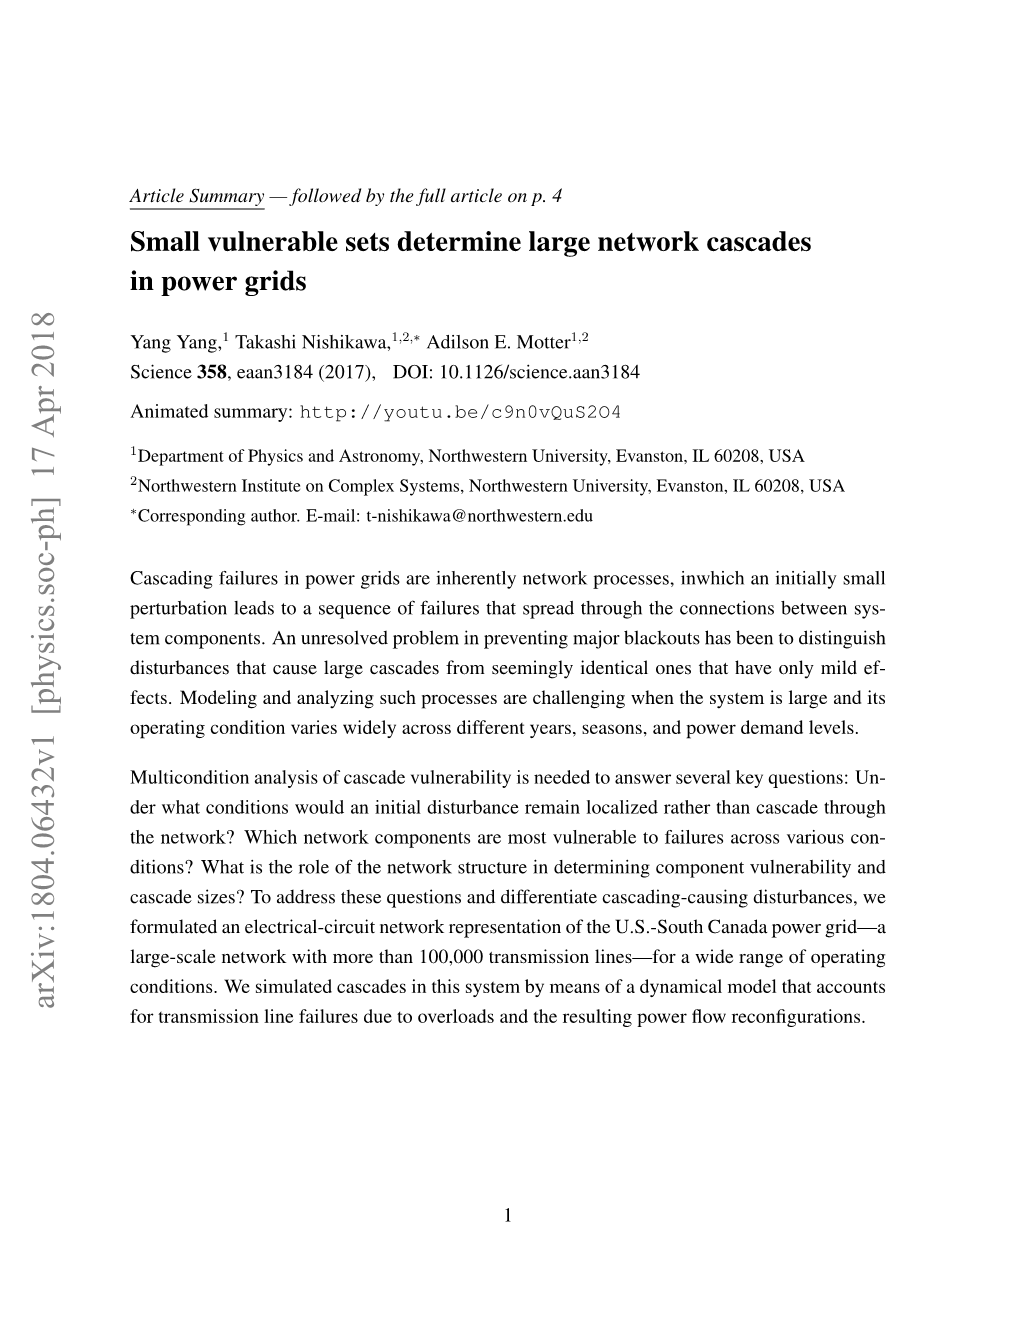 Small Vulnerable Sets Determine Large Network Cascades in Power Grids